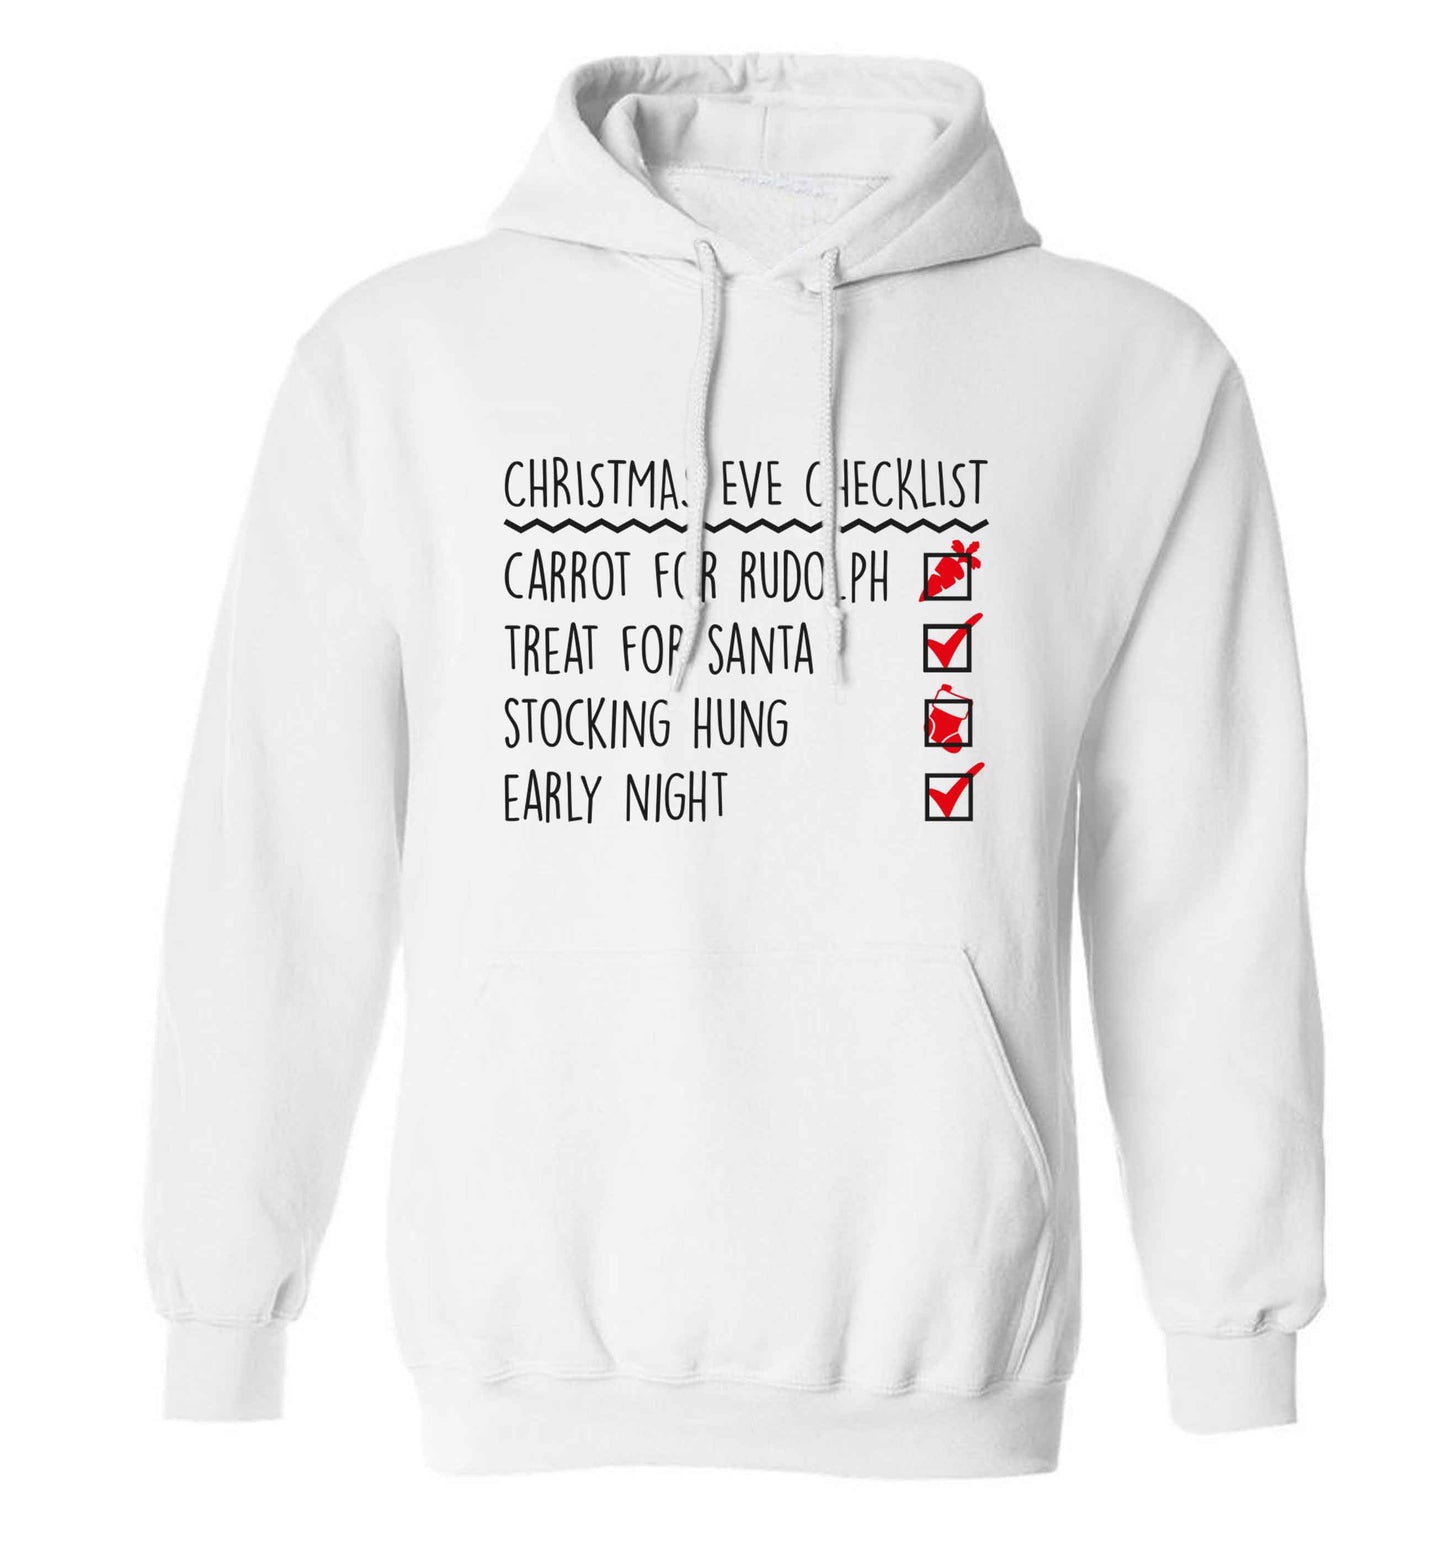 Candy Canes Candy Corns adults unisex white hoodie 2XL